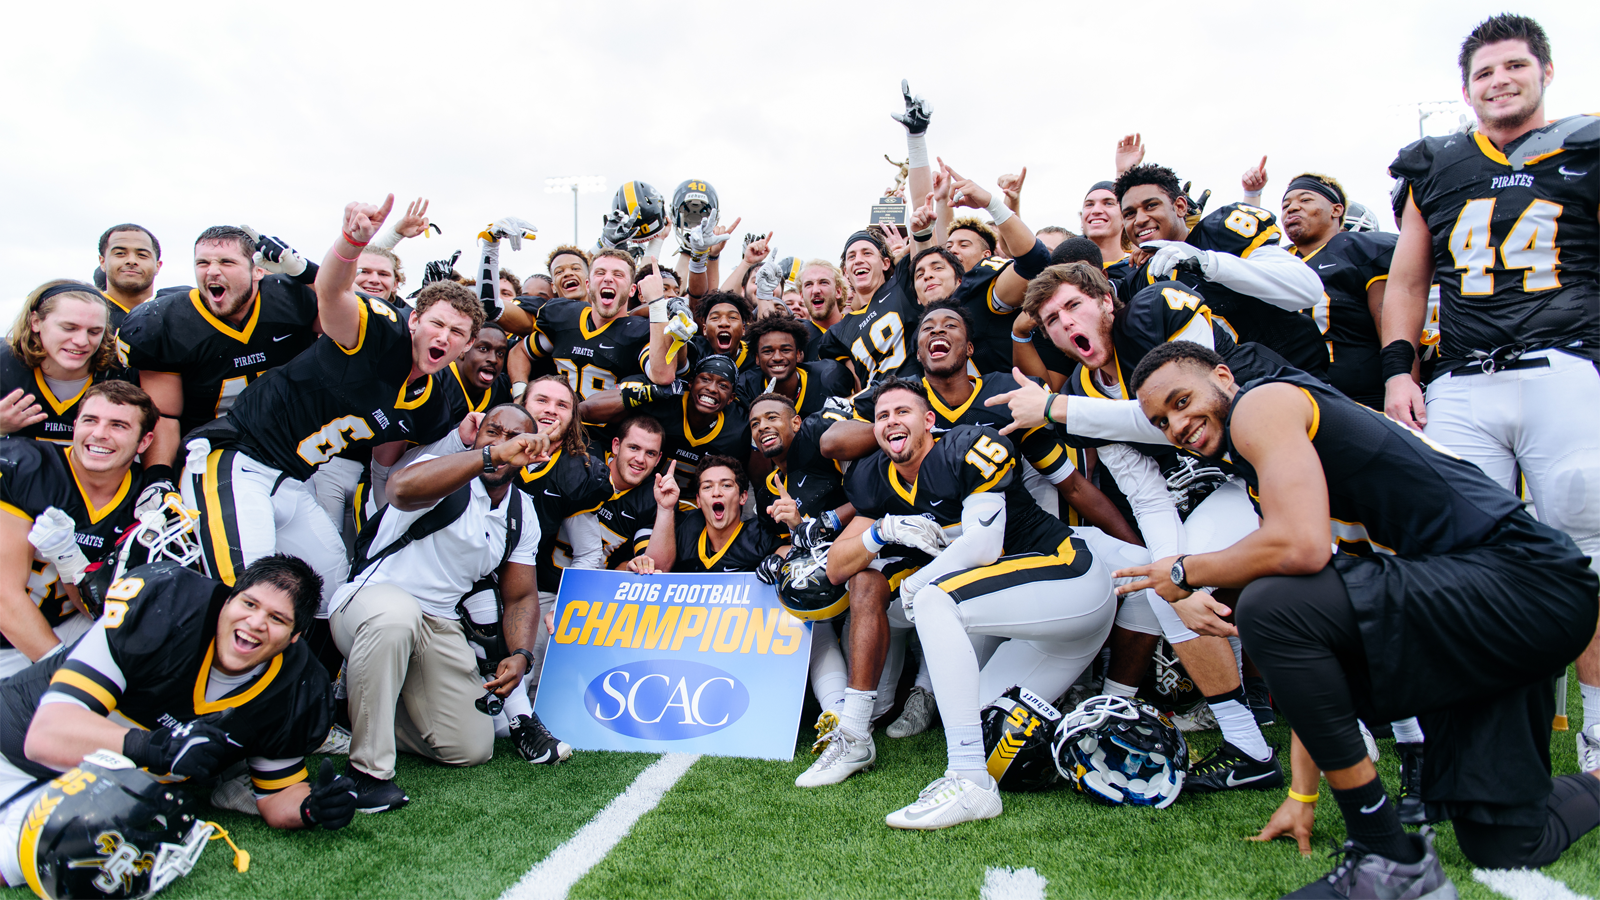 Southwestern tops Trinity, captures SCAC championship